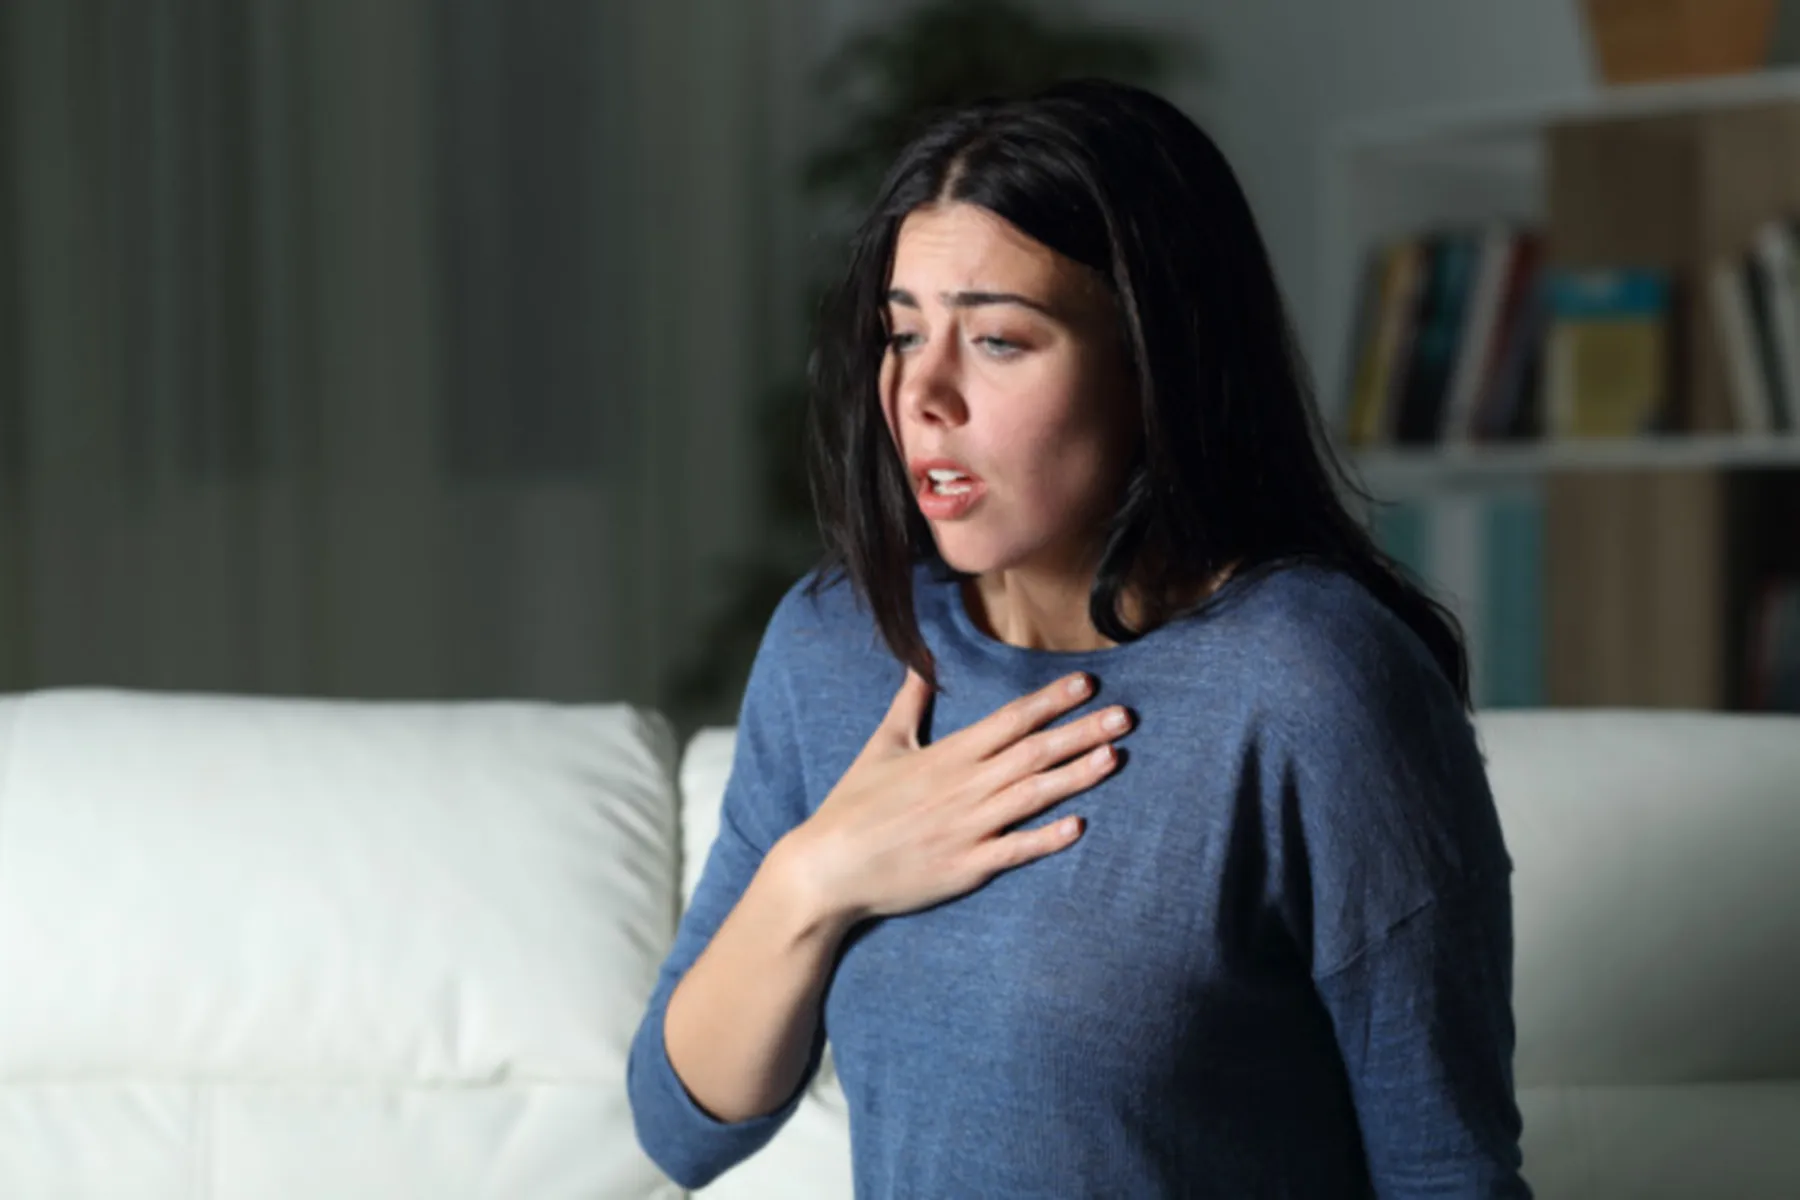 Woman looking panicked, with her hand on her chest